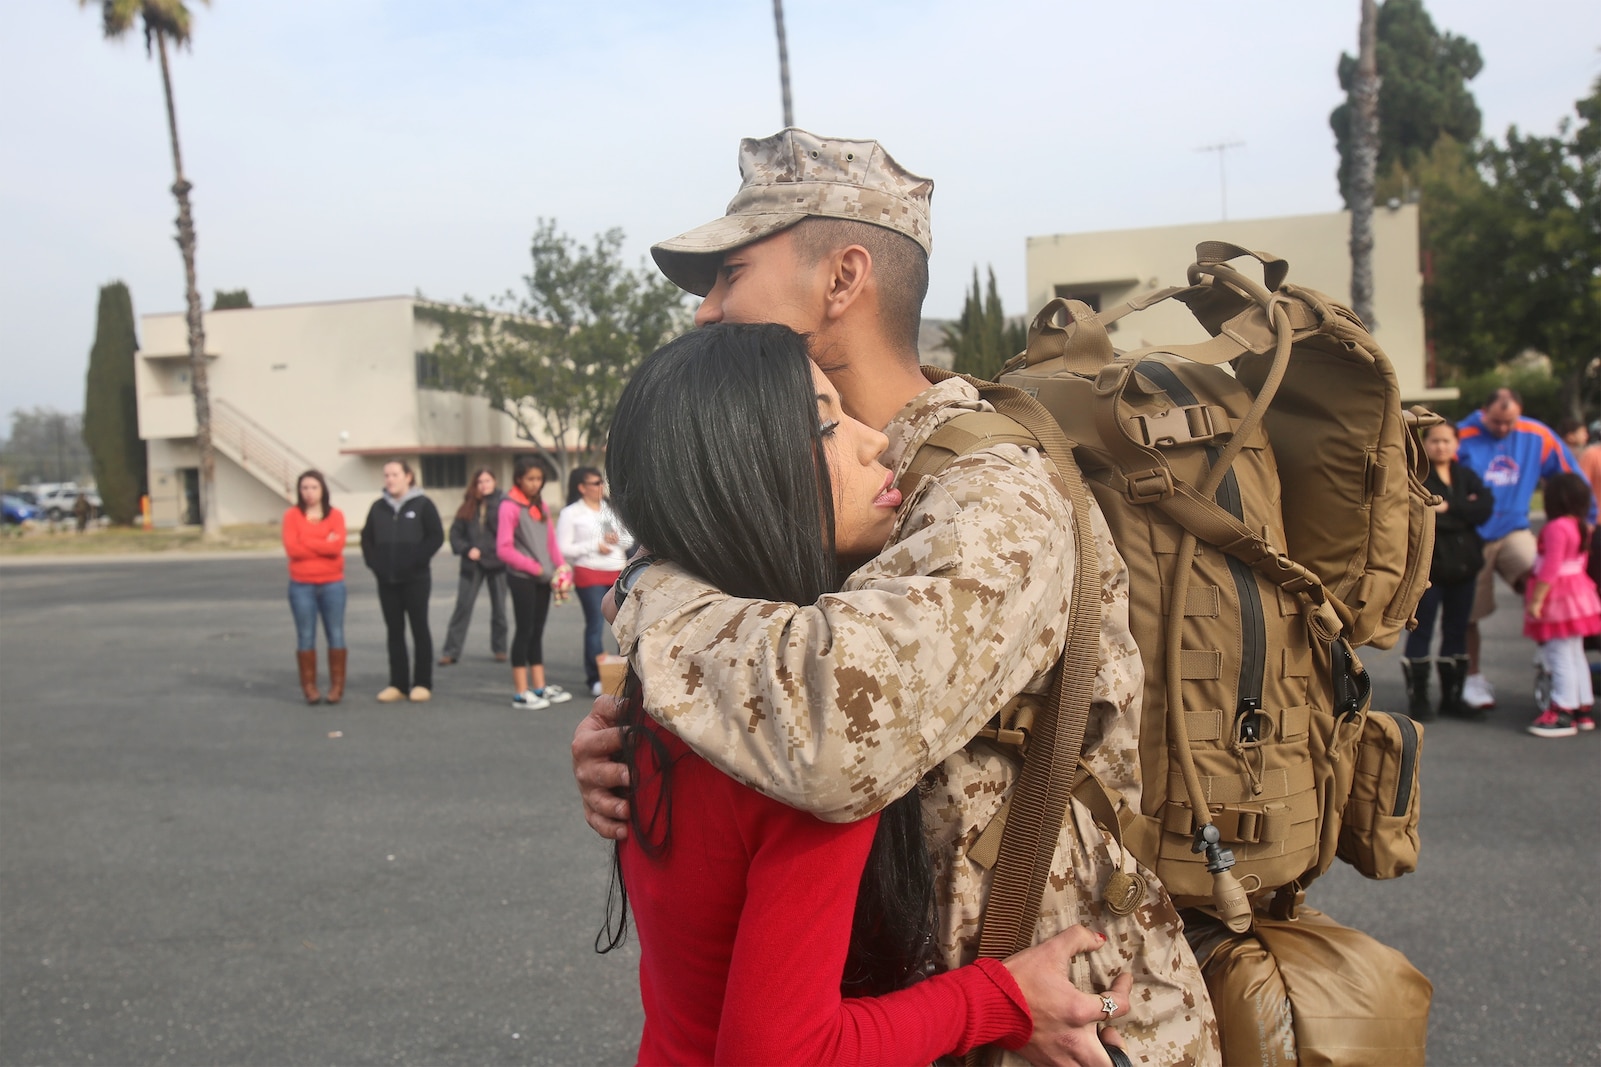 First Lt. Ricky Mansyur, a supply officer with Combat Logistics Battalion 7, Combat Logistics Regiment 1, 1st Marine Logistics Group, hugs his wife, Megan, before boarding a bus as part of his first step of traveling to Camp Leatherneck, Afghanistan, from Camp Pendleton, Calif., Jan. 10, 2014 Marines with CLB-7, along with elements of 1st Explosive Ordnance Disposal Company, 1st Medical Battalion, 1st Dental Battalion and 7th Engineer Support Battalion, will support I Marine Expeditionary Force (Fwd) in assuming responsibilities as the logistics battalion for Regional Command (Southwest). Mansyur is a native of New Jersey, N.J.